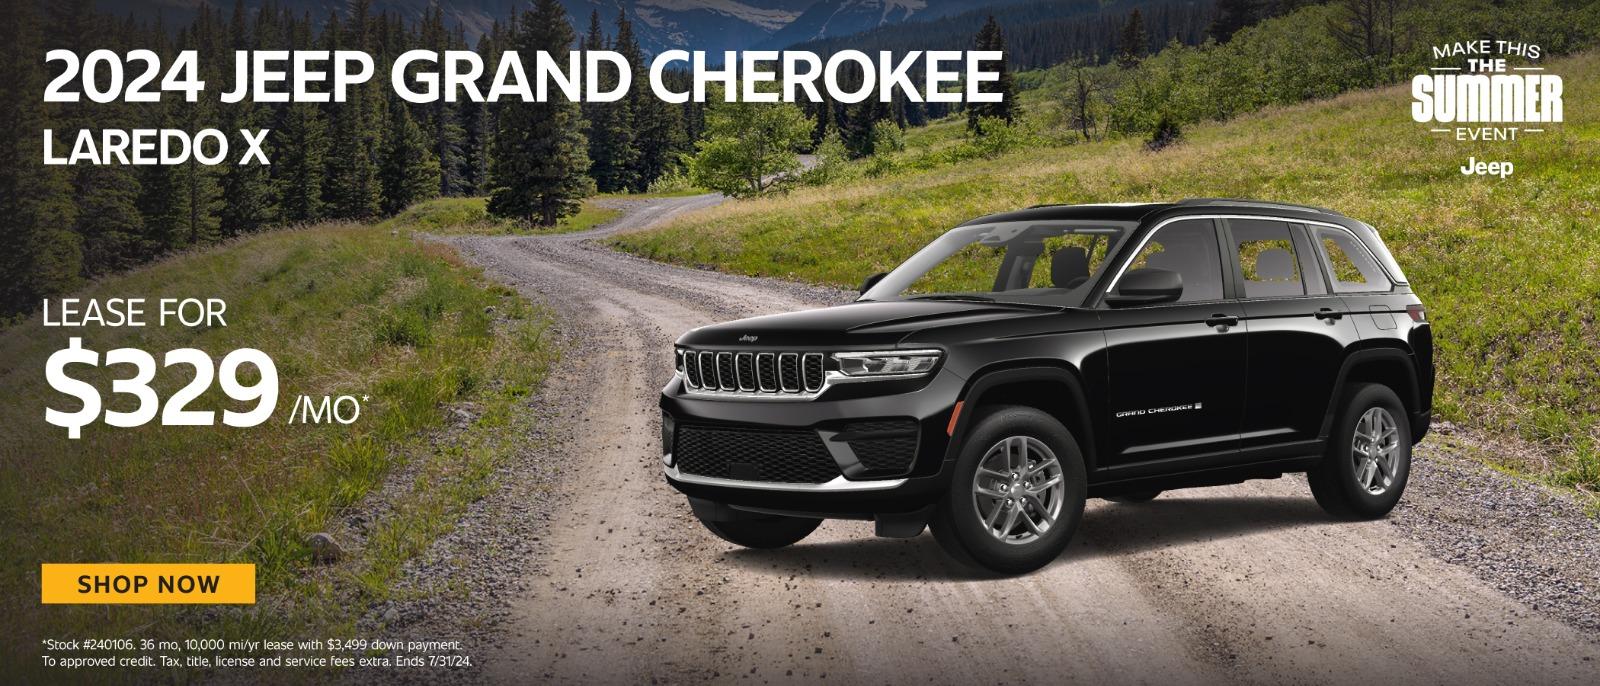 2023 Jeep Grand Cherokee Lease for $329 per month